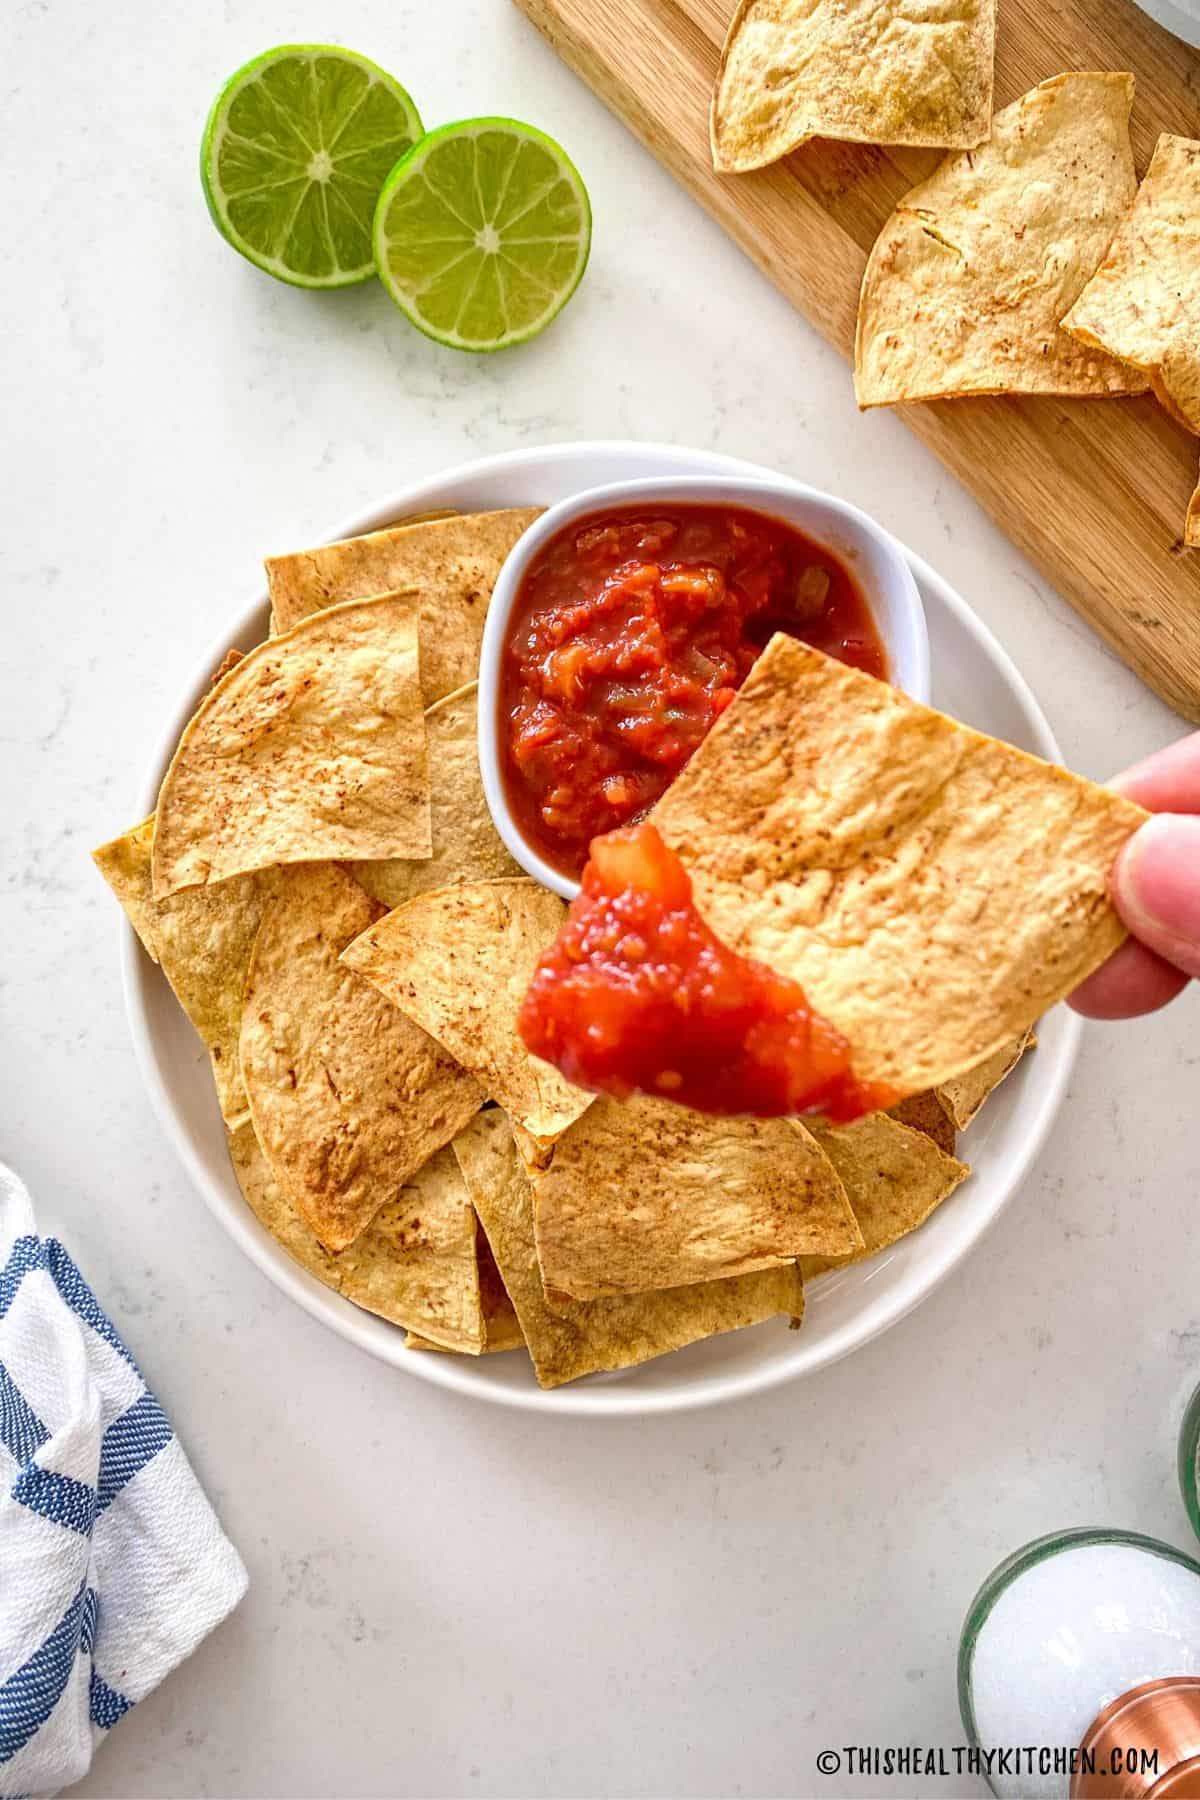 Chip dunked with red salsa being held above plate with more chips below.